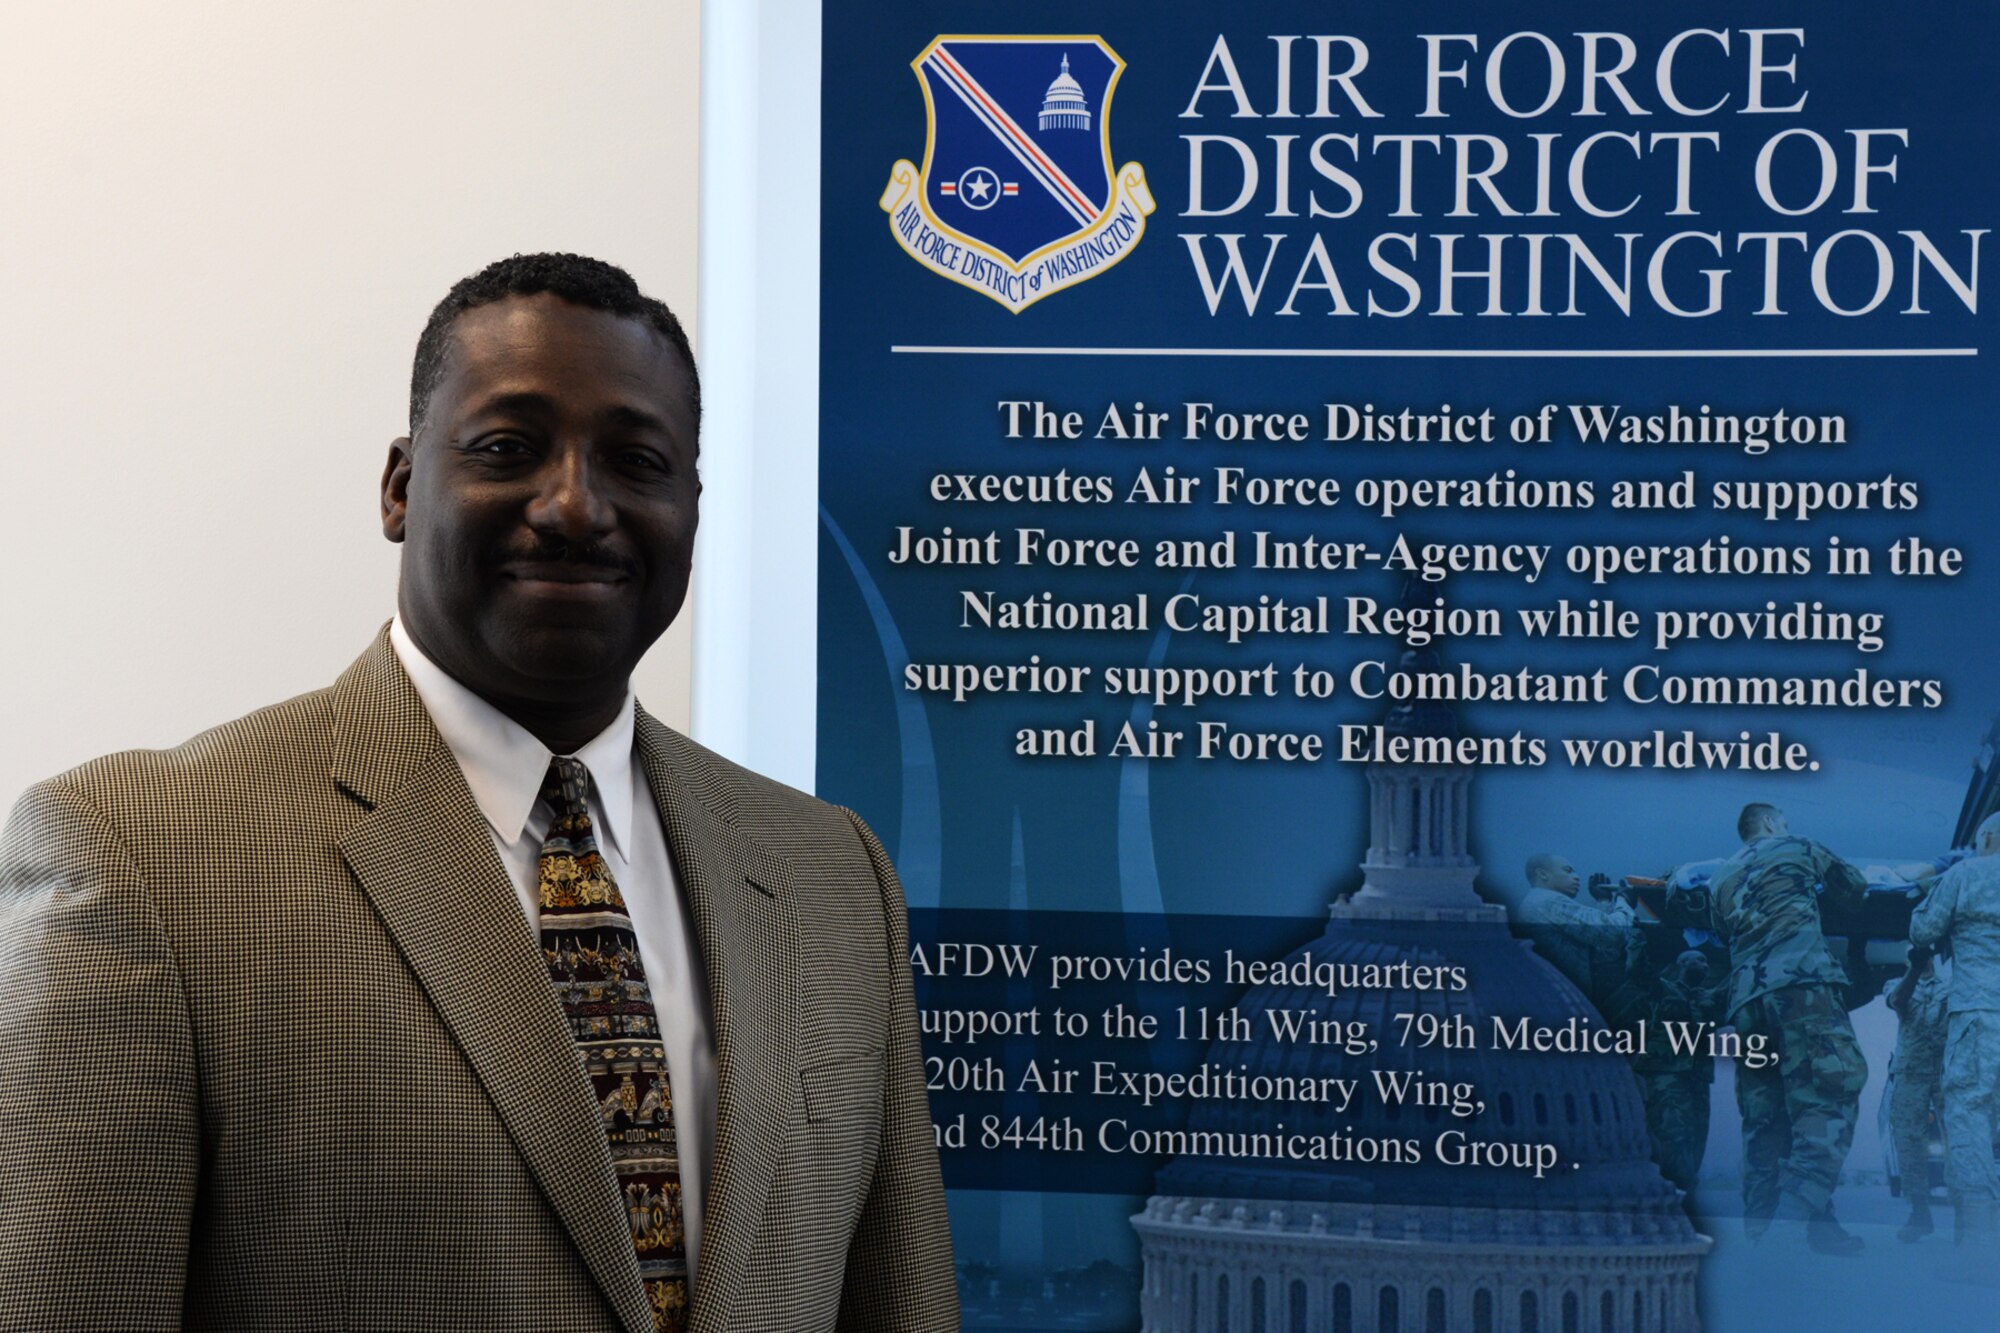 Wayne McCray, an Air Force District of Washington Capital Airman, is an essential contributor to the Air Force communication mission within the National Capital Region. McCray’s support with the 844th Communications Group also has a direct impact on the global Air Force mission.McCray is an education specialist for AFDW’s A6 and the 844th CG. He is also the commander’s program inspection manager and inspector general for the 844th CG. (Tech Sgt. Matt Davis)
